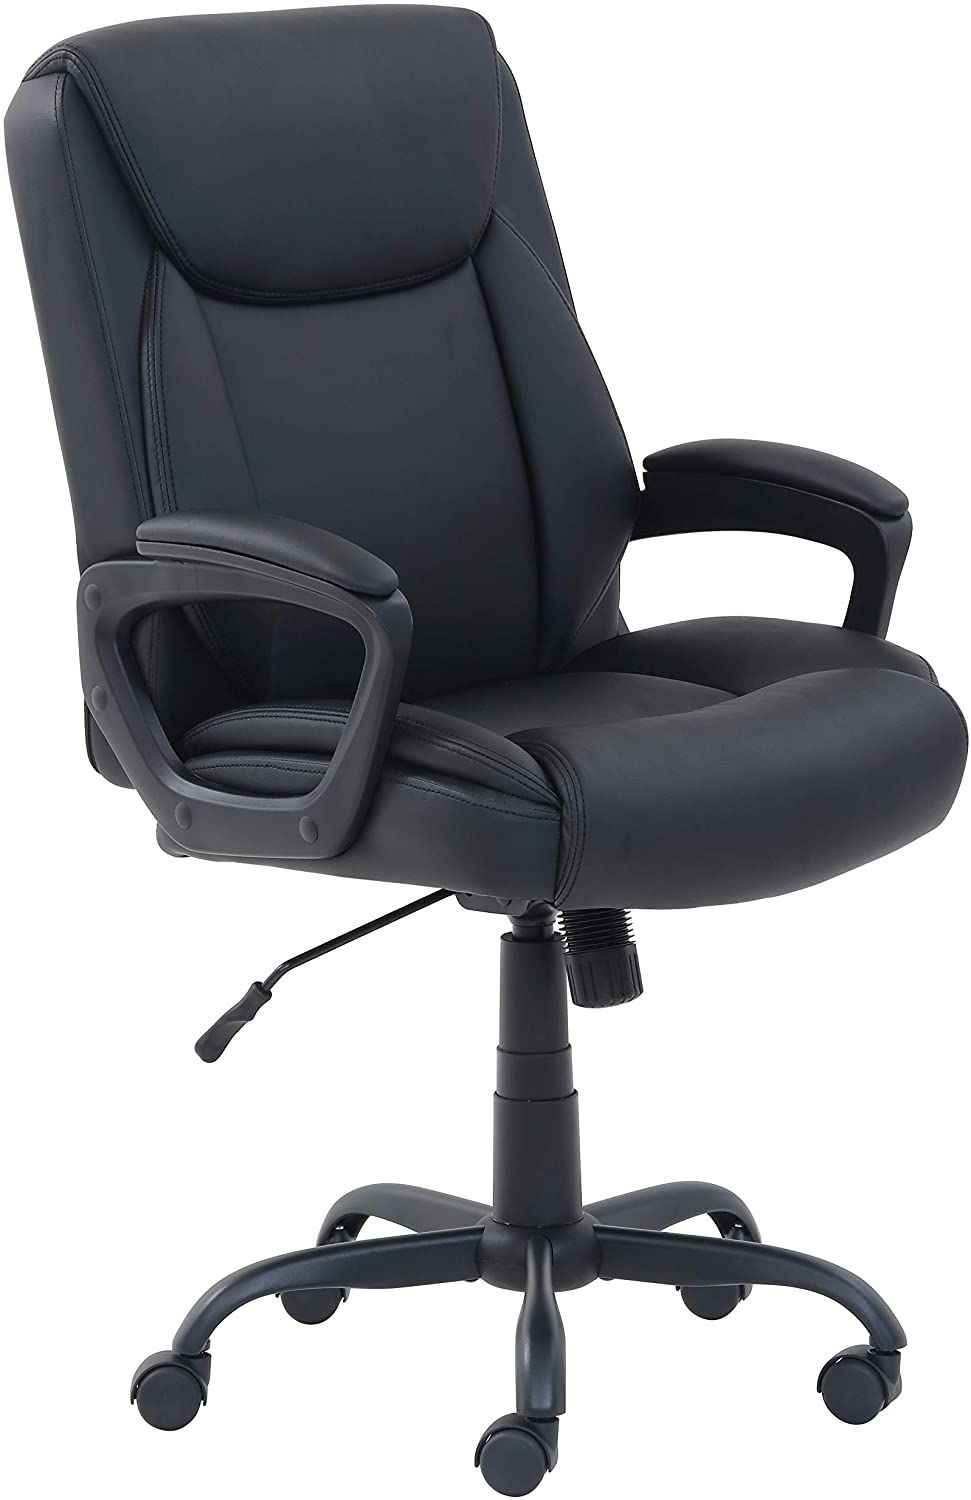 The best Amazon office chairs: 8 comfortable options | Real Homes